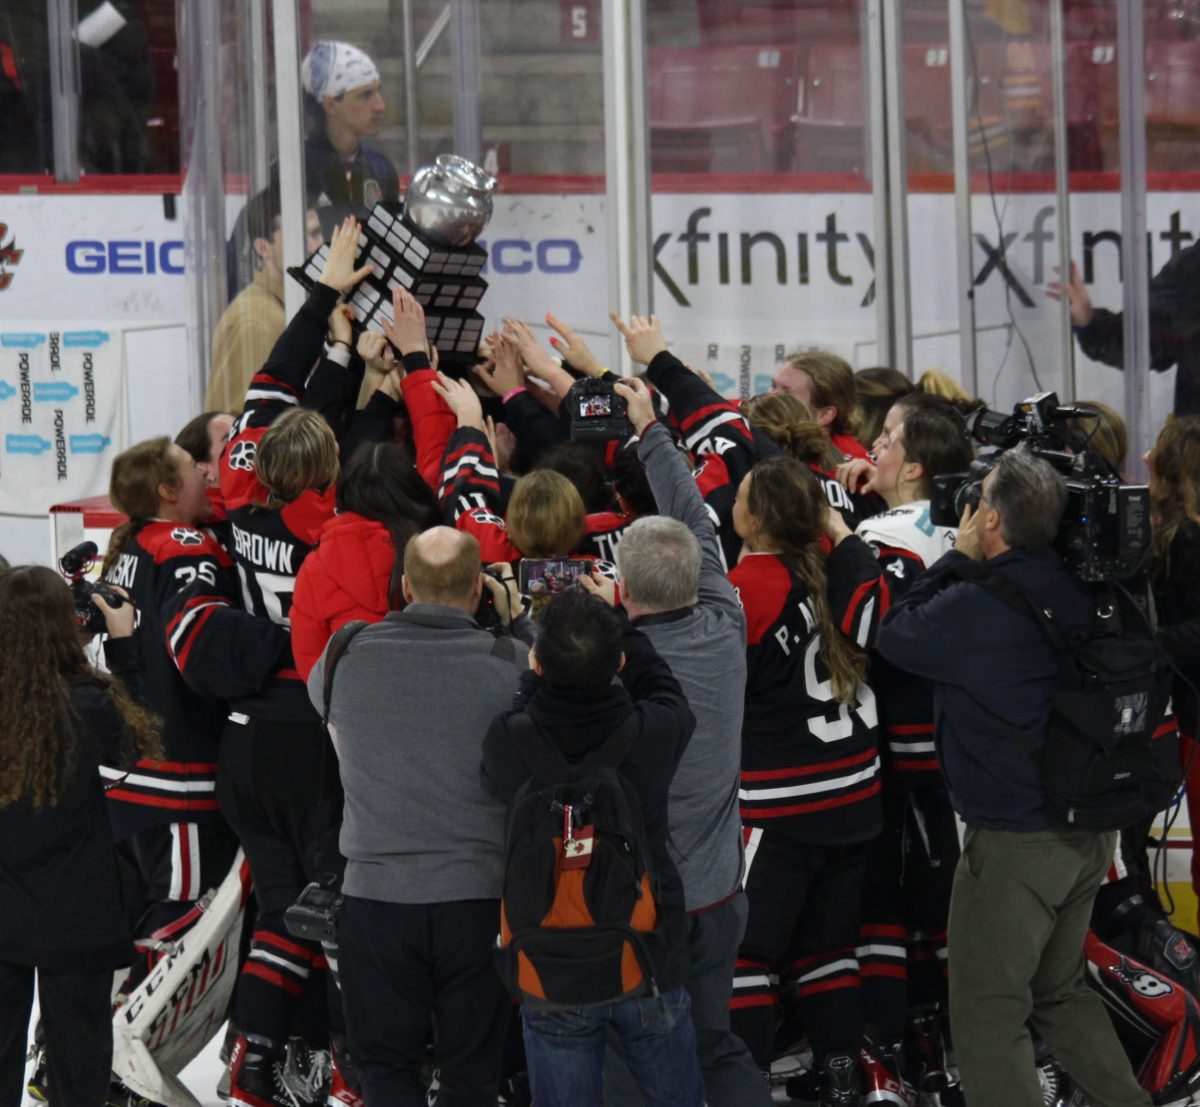 The+Northeastern+womens+hockey+team+hoists+the+Beanpot+trophy+at+the+end+of+last+years+tournament.+The+Huskies+beat+BC+2-1+in+the+championship+to+claim+the+title.+